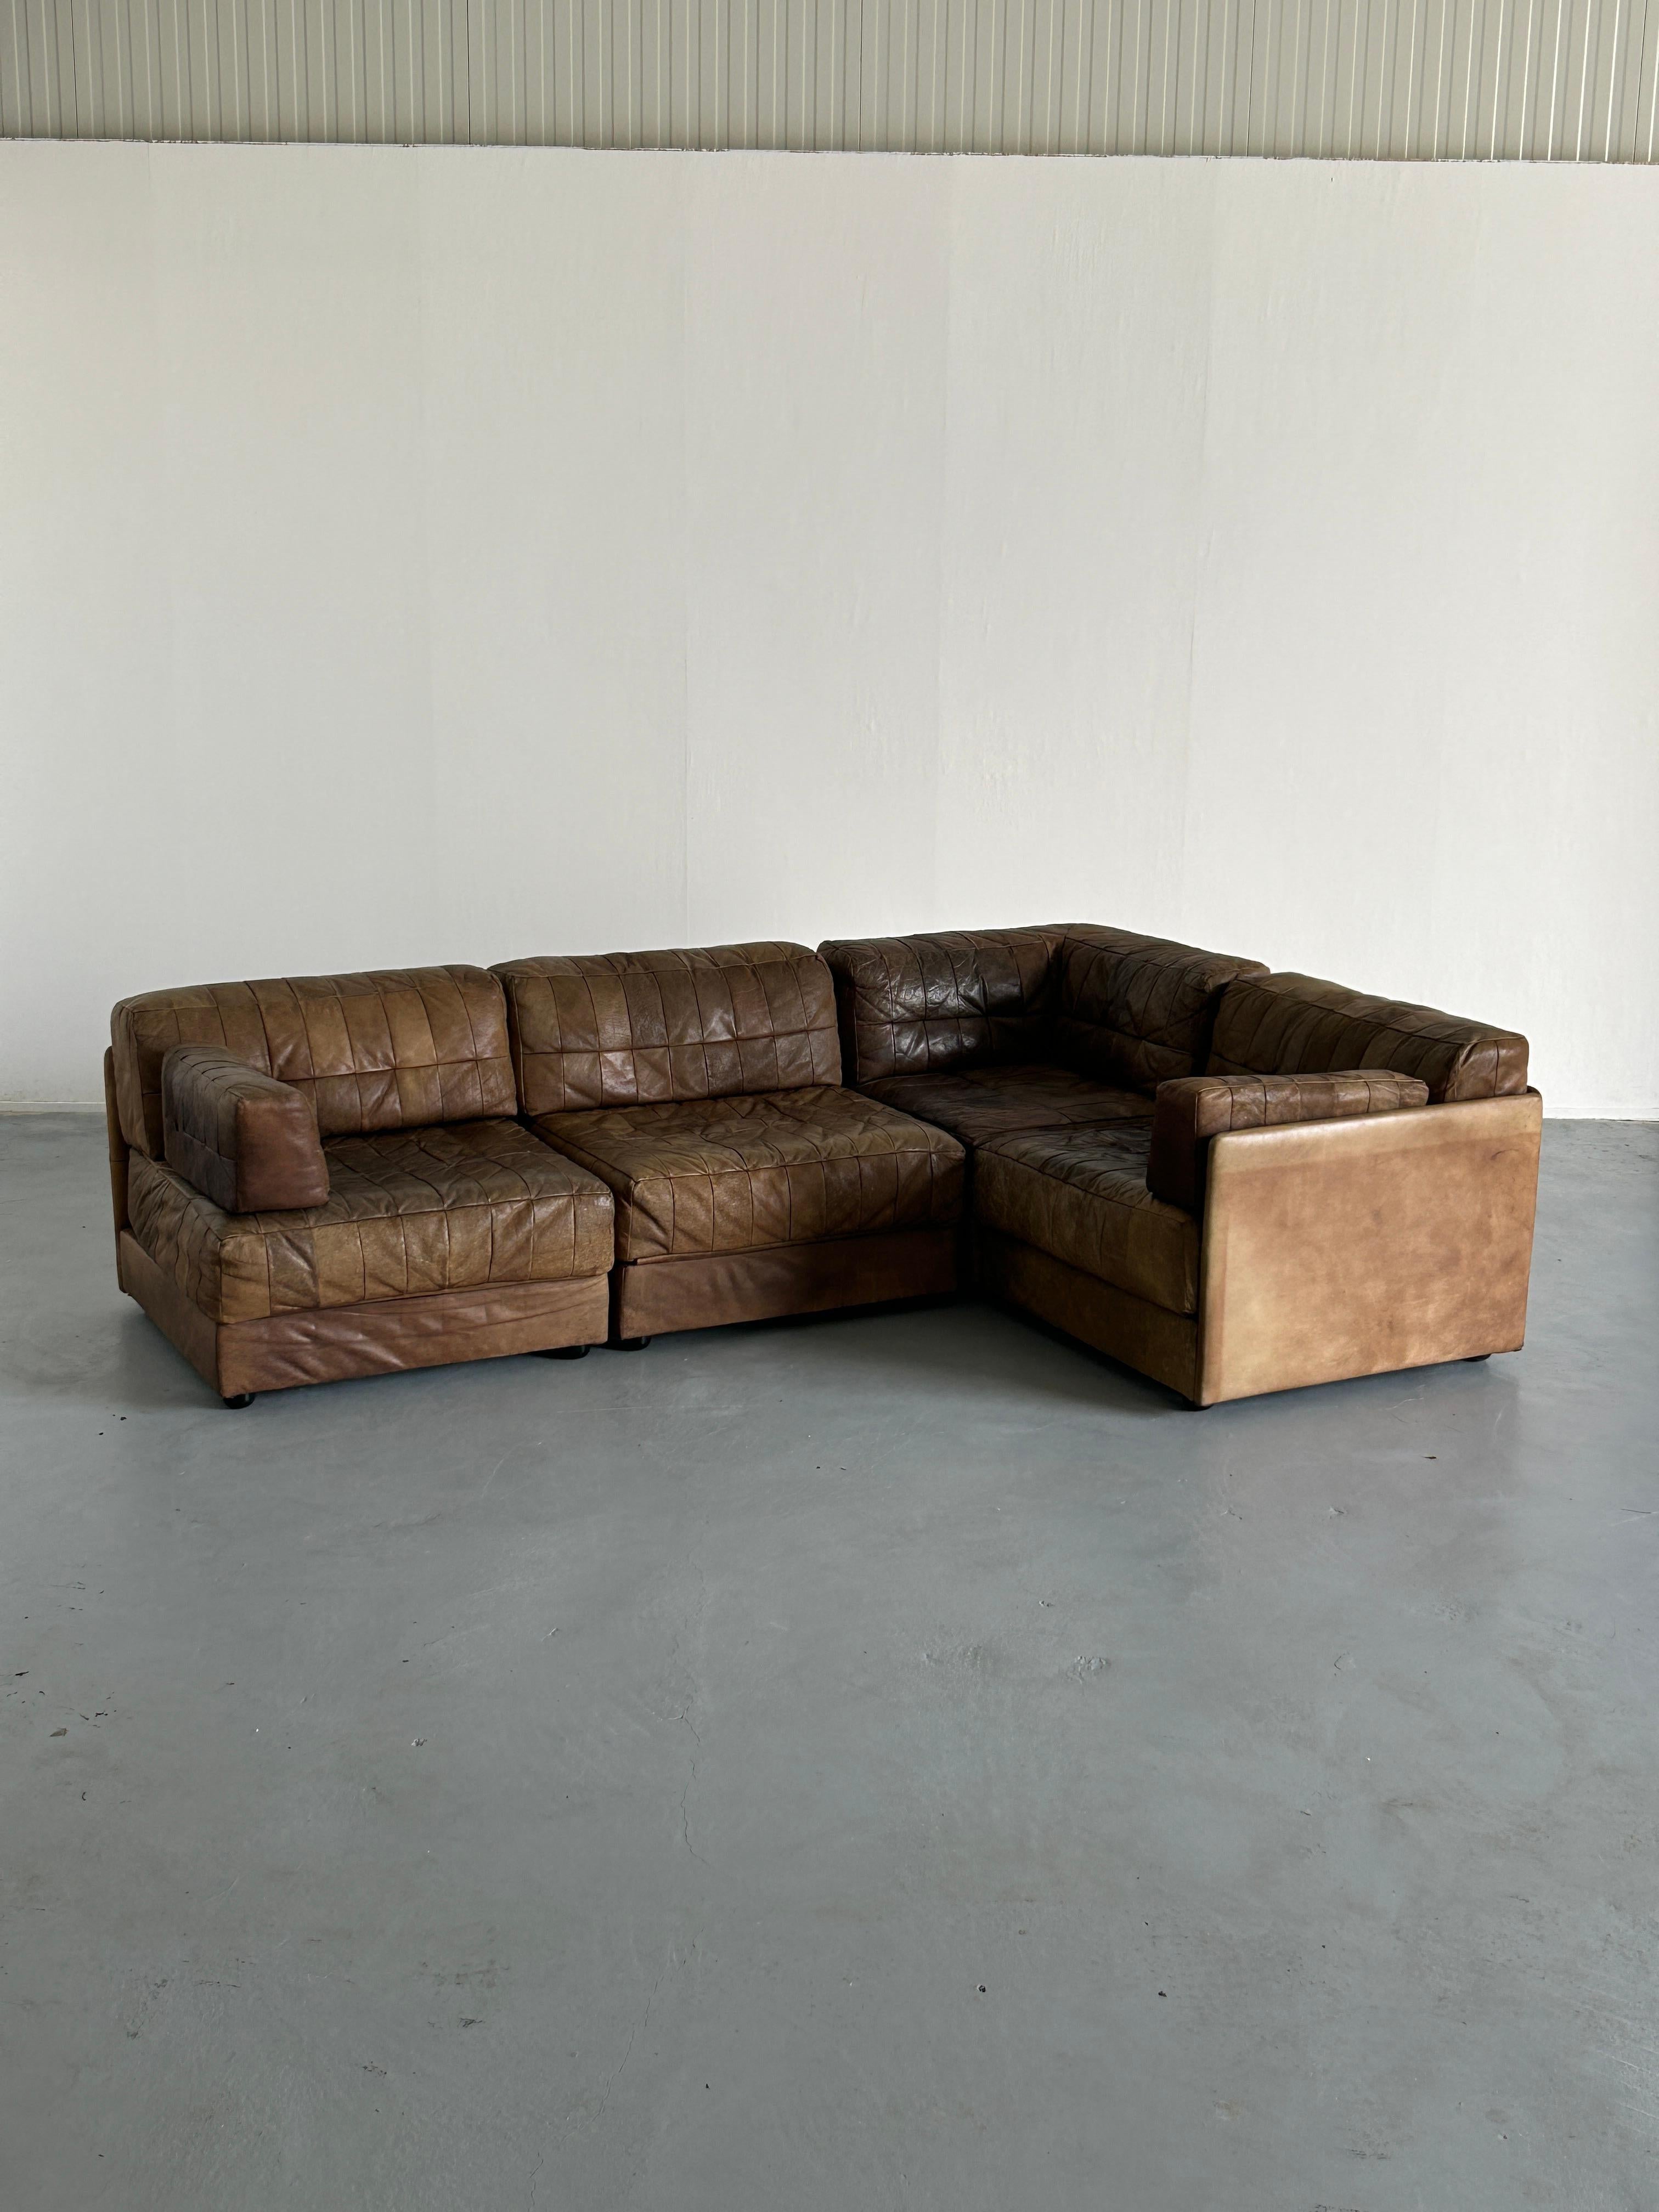 A stunning four-part Mid-Century-Modern patchwork leather modular sofa, produced in the early 1970s in West Germany, and following the style of the 1970s De Sede modular sofas.

A 1970s statement of comfort, three of the four modules fold out into